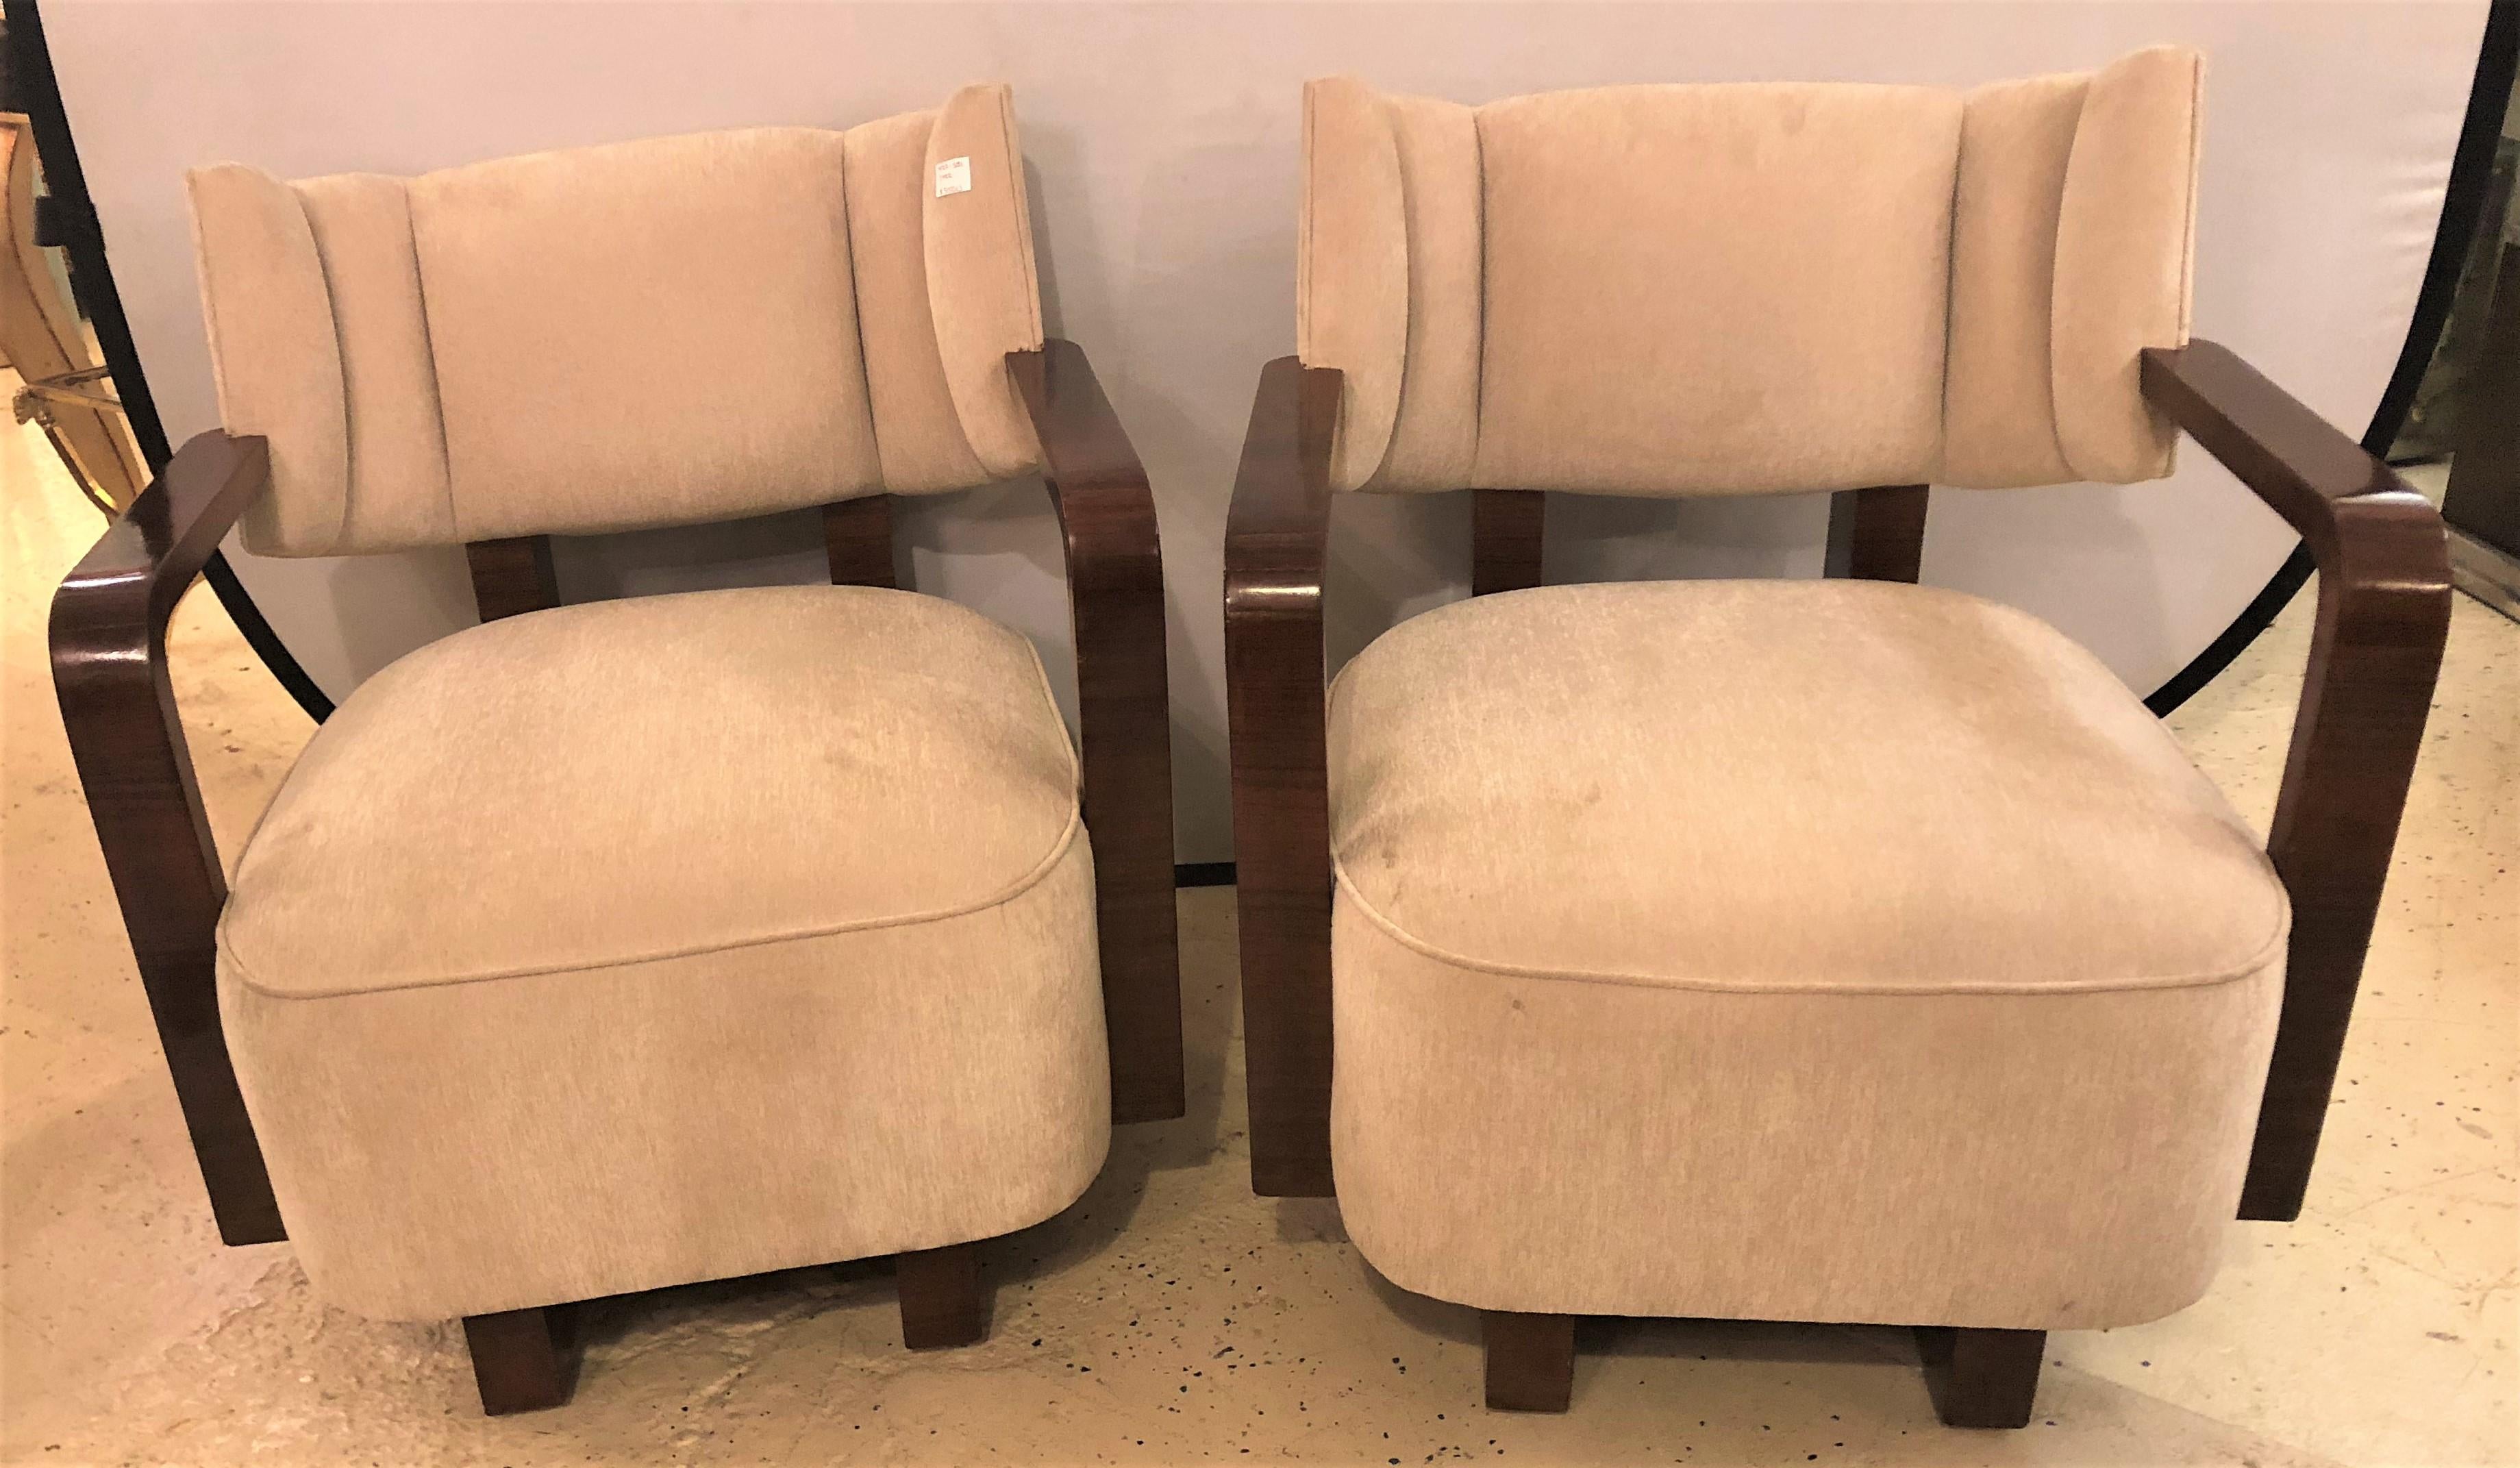 Pair of Modern Art Deco rosewood club chairs. Each having been finely hand rubbed French polished. Each with a rosewood frame supporting the back and seat rest as well as having full rosewood arms and runners. Strong and sturdy. 

Measures: 31.75